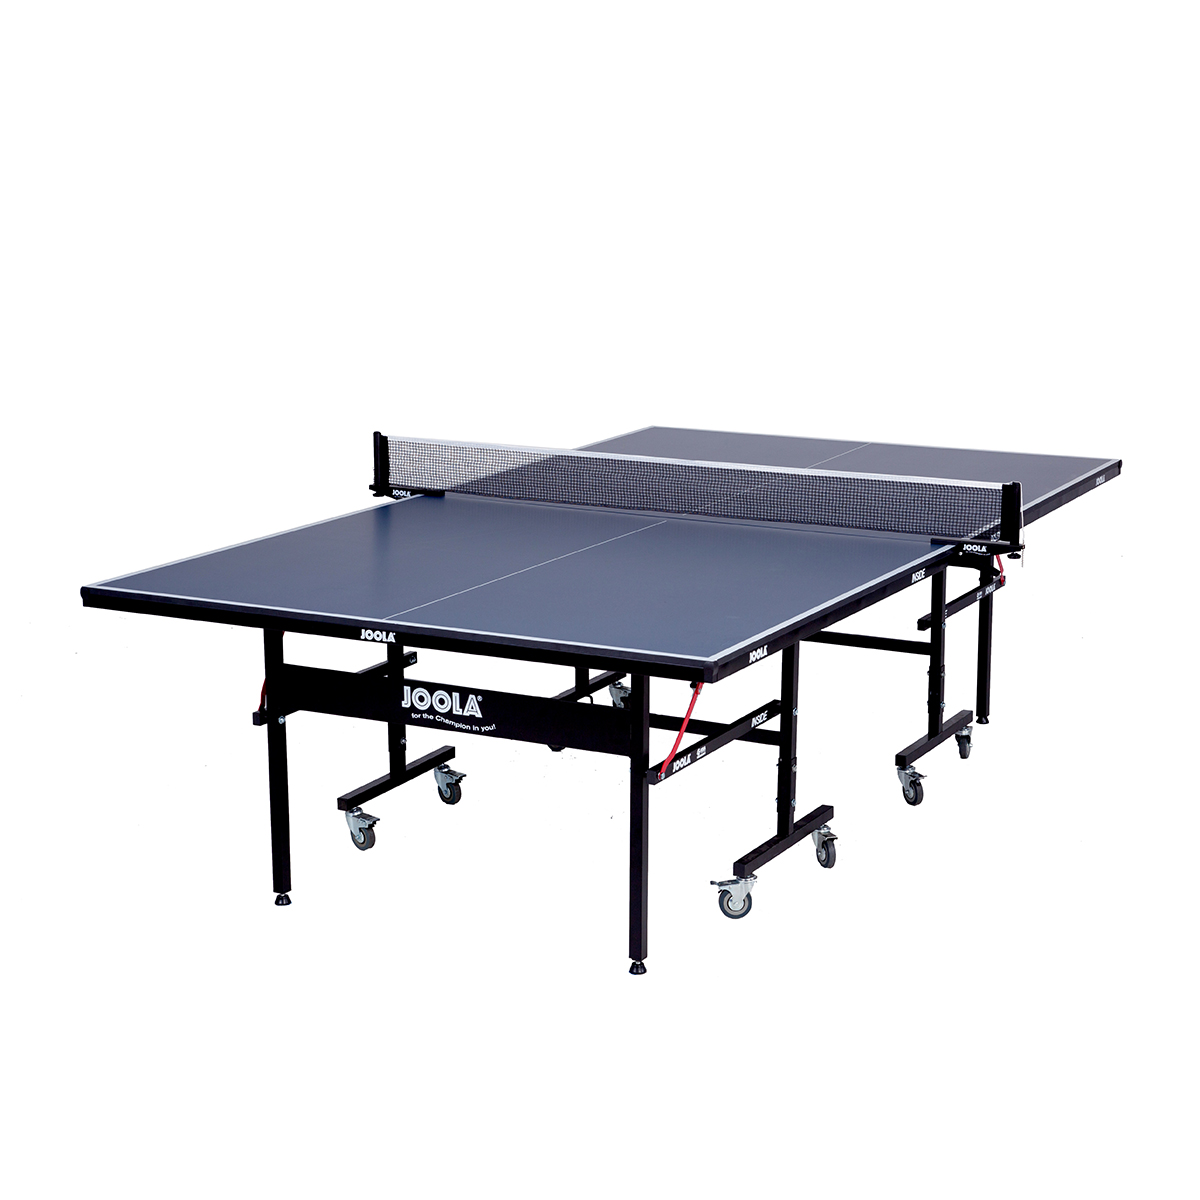 JOOLA INSIDE 15 TABLE TENNIS TABLE WITH NET SET (15MM THICK)